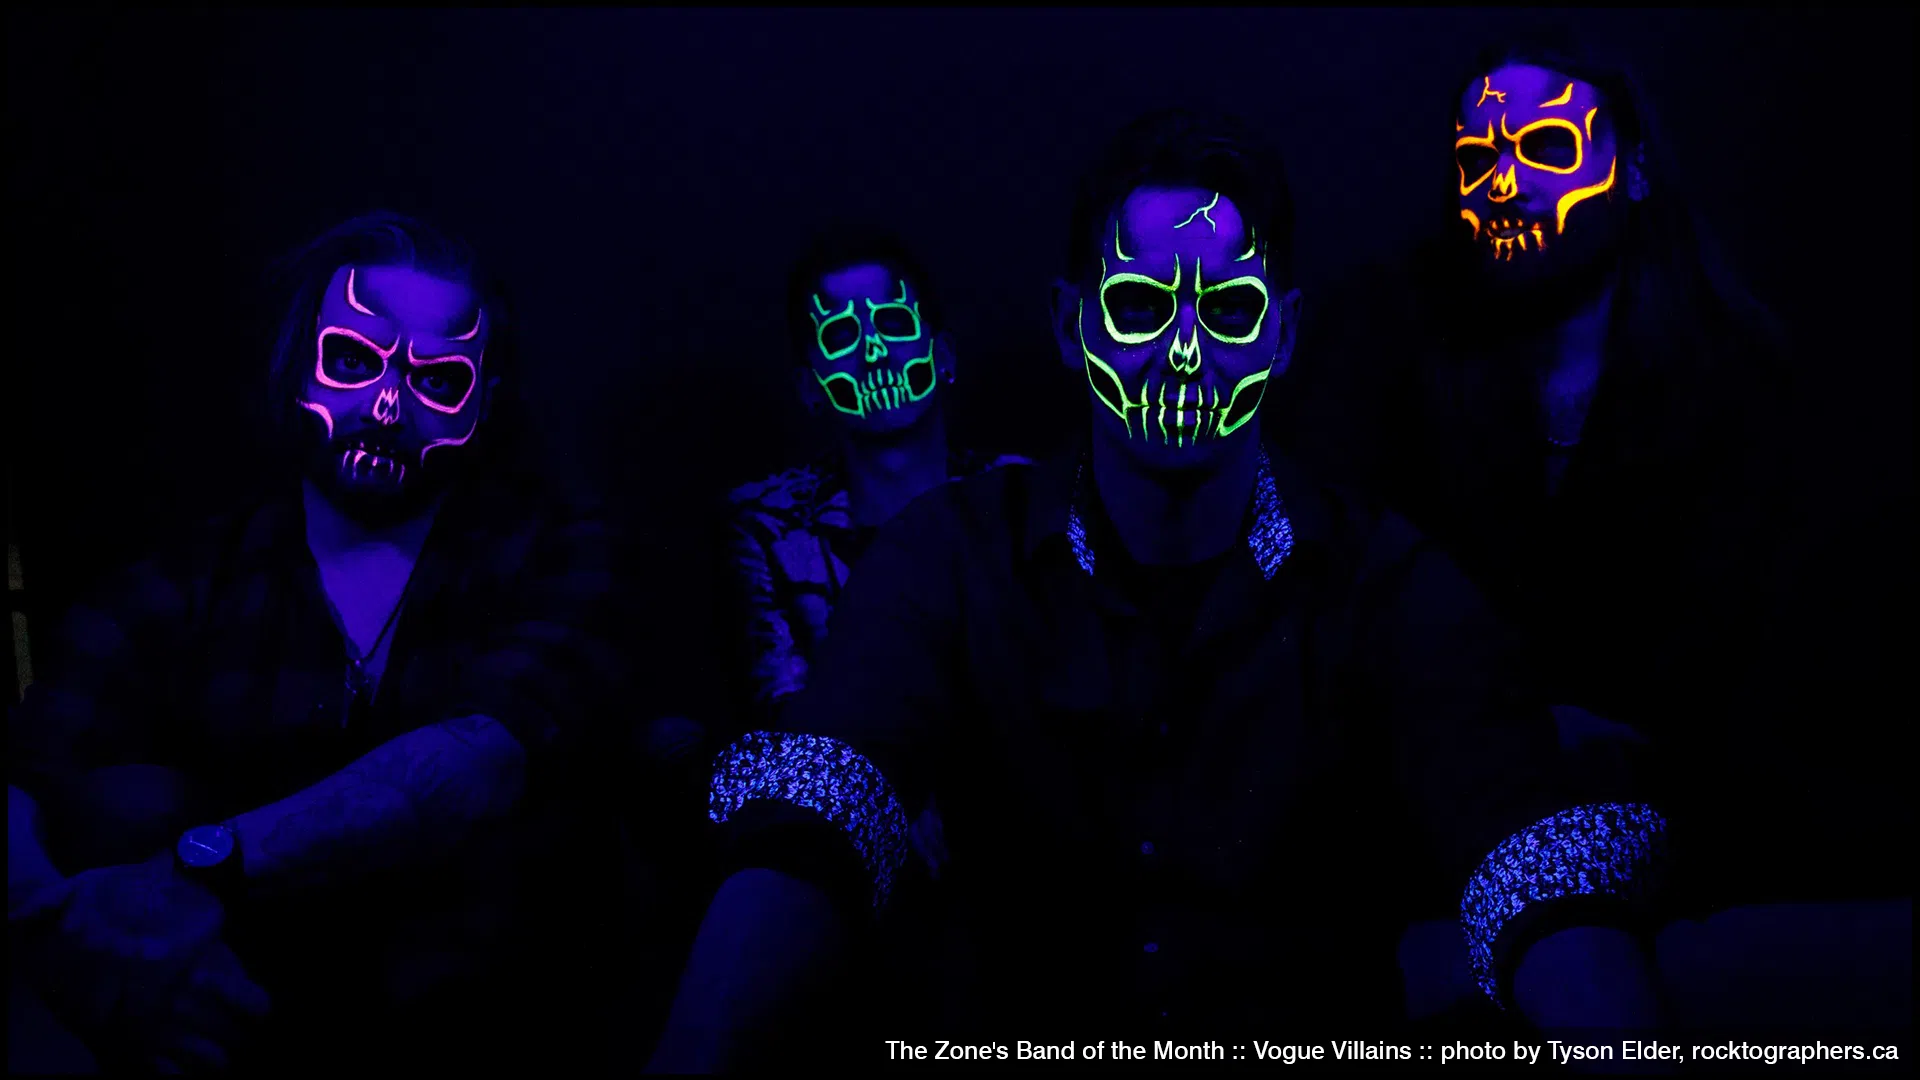  The Zone's Band of the Month is Vogue Villains 